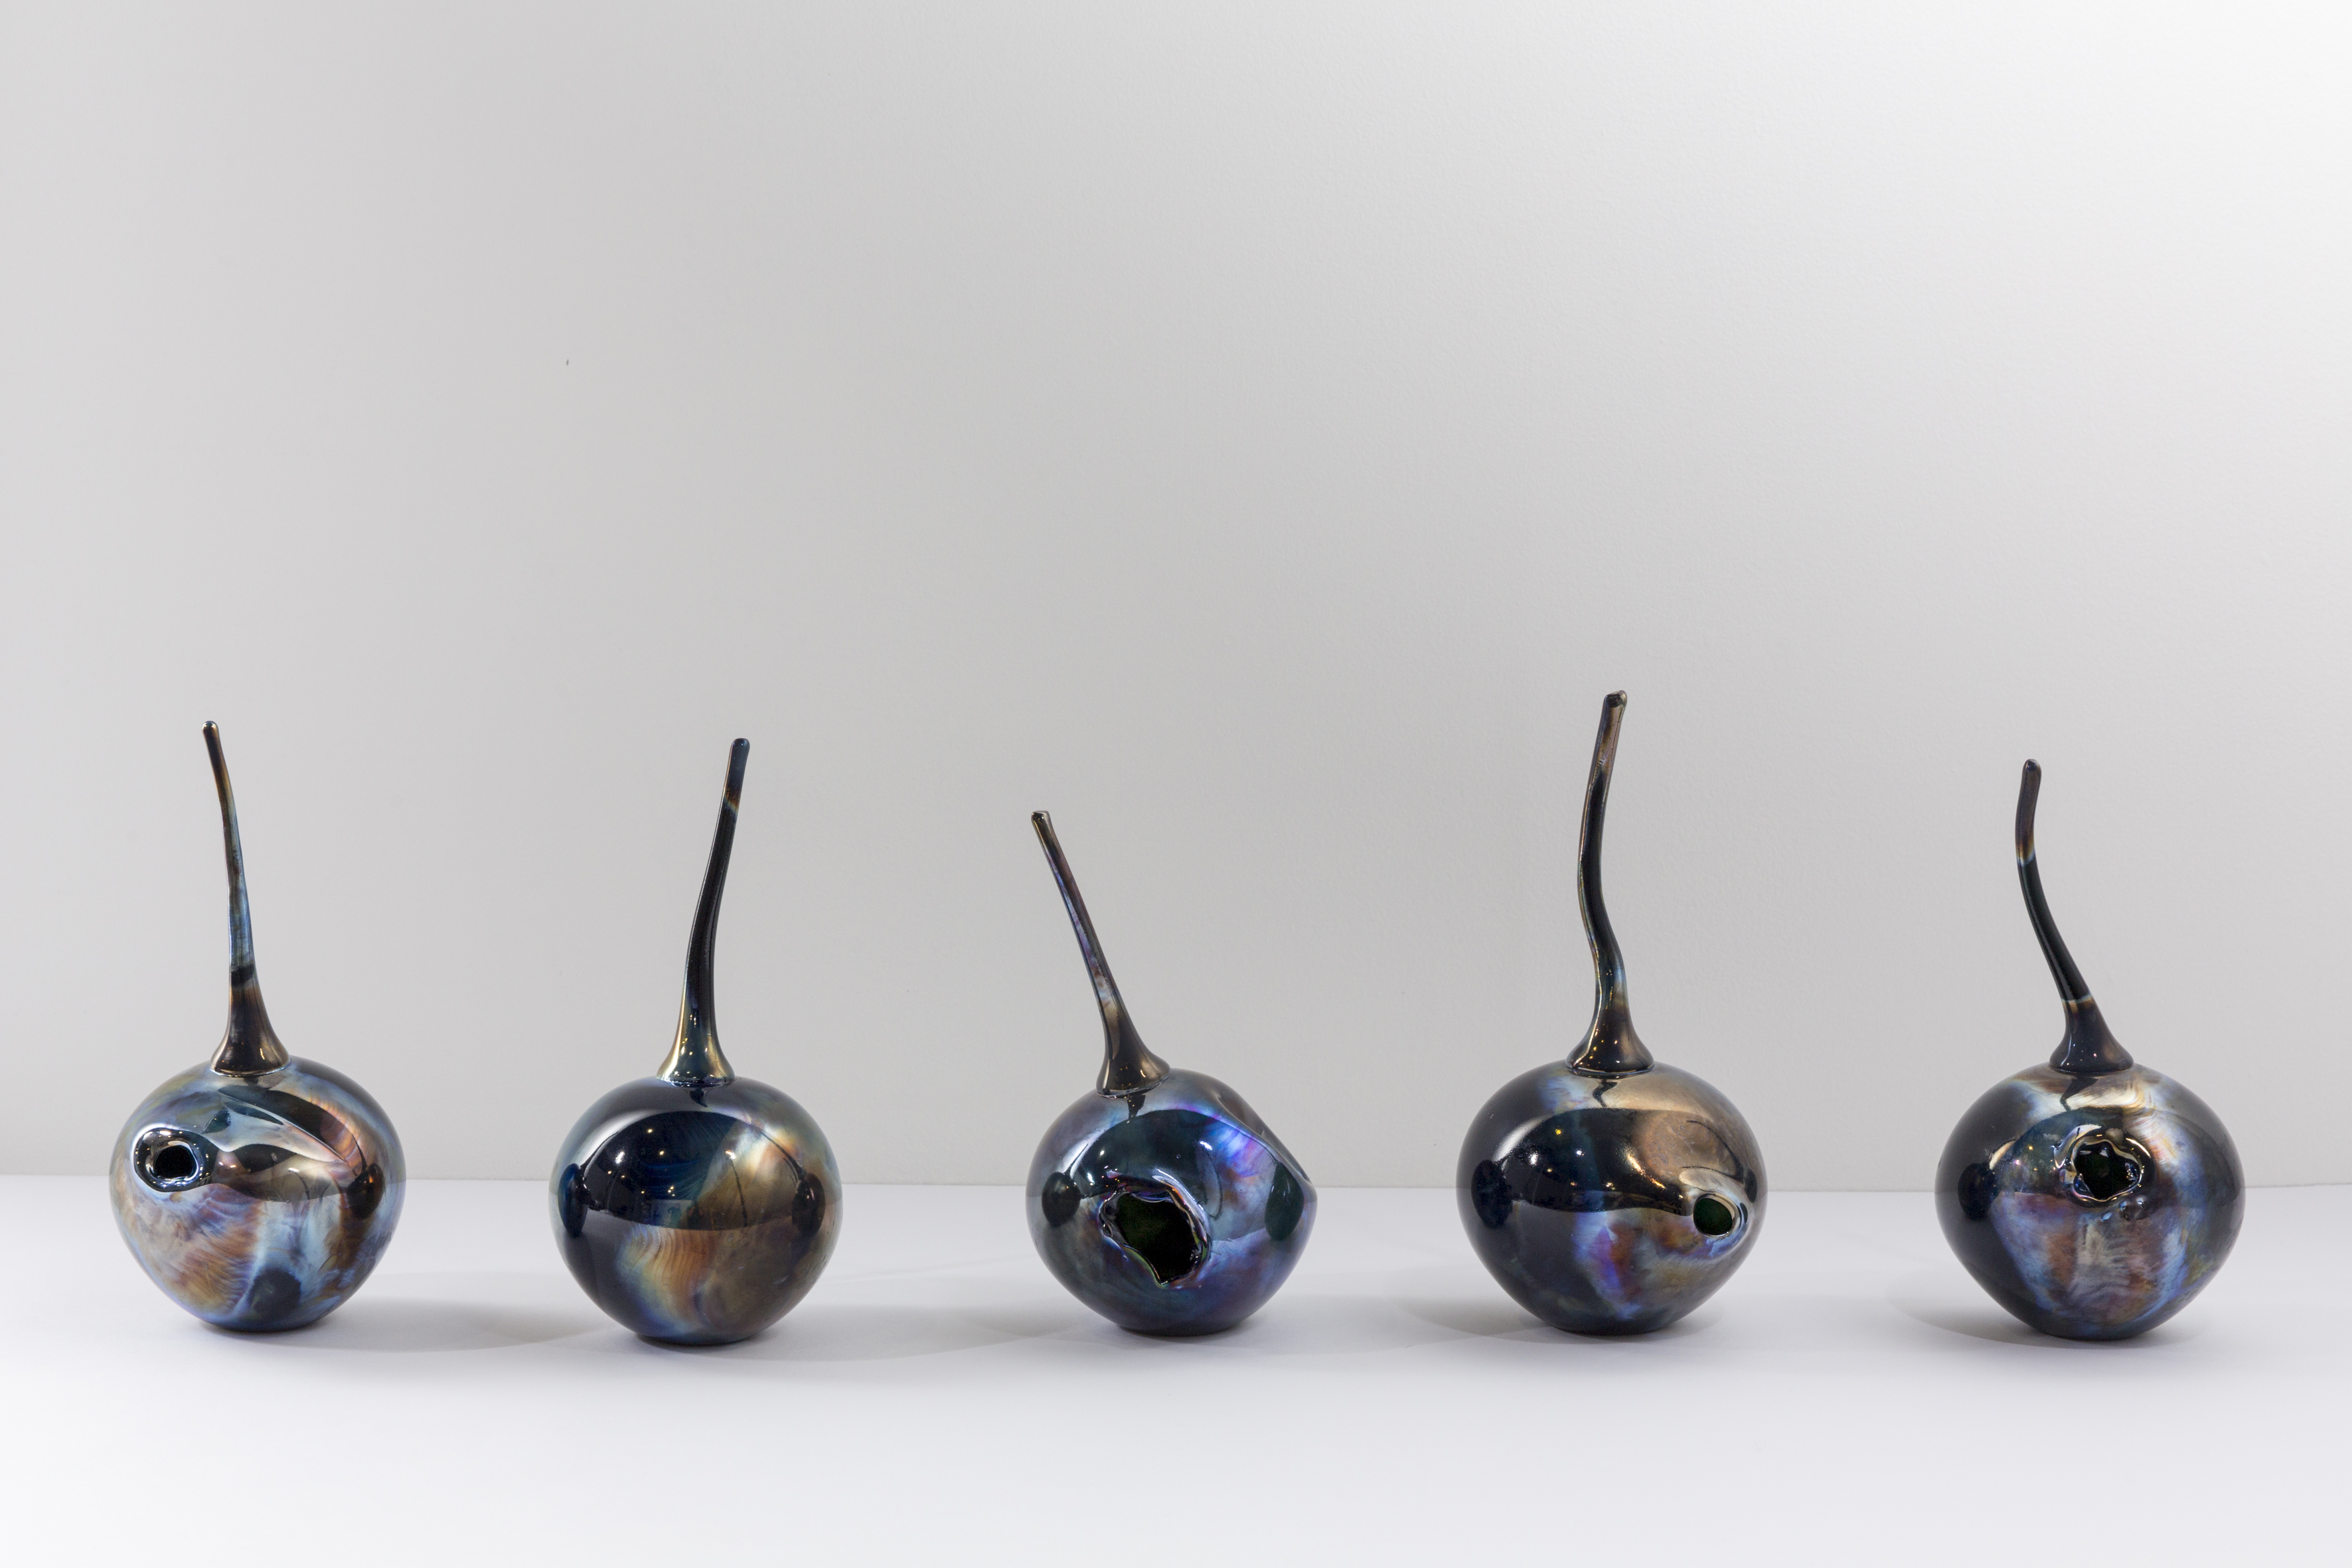 Image Description: A photograph of five glass cherry-like objects resembling bush plums. They sit on a white plinth against a white background. 